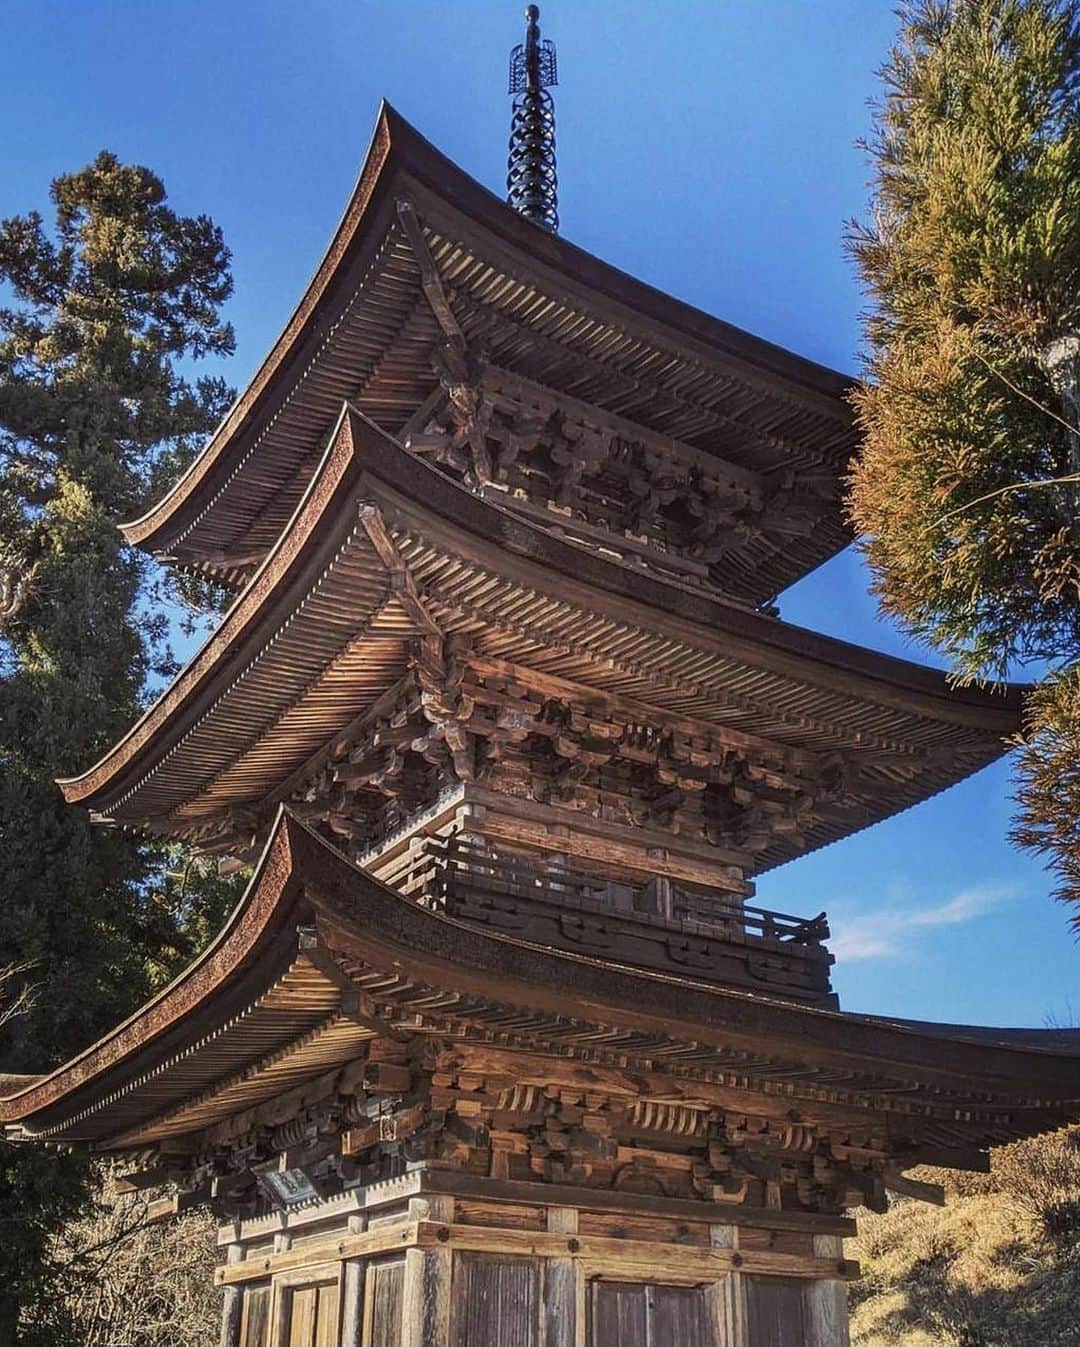 ?長野県 観光 公式インスタグラム のインスタグラム：「// Photo by @naoyuki.kobayashi.3  国宝 「大法寺 三重塔」 ＠青木村  和様の建築様式が正確に守られ建てられた  「大法寺 三重塔」   空を舞う鳥の羽のように広がる三層の屋根と、どっしりとした塔全体のバランスが崇高な印象を与えます😊✨️  建築物としてはもちろん、周囲の景観や風光との調和も美しく国宝に指定されています👀✨️  その美しさから、近くを通る旅人が ふり返りふり返り塔を眺めたことから「見返りの塔」とも呼ばれていますよ😀✨️  ＝＝＝＝＝＝＝＝＝  The Three-Story Pagoda of Daihouji Temple (Aoki Village)  The three-story pagoda of Daihouji Temple is a precise expression of Japanese-style architecture.  The balance of the sturdy pagoda tower and the three tiered rooves, which curve outward elegantly like a bird’s wings, is sublime.  Beyond the structure itself, the pagoda also harmonizes beautiful with the surrounding landscape and nature, earning it a place as one of Japan’s national treasures.  Due to its beauty, visitors couldn’t help but look back at the pagoda as they left, earning it the nickname, “Mikaeri-no-to.”  ＿＿＿＿＿＿＿＿＿　  Location / Aoki Village , Nagano , Japan   #おうちでながの #長野のいいところ #大法寺 #青木村  ＿＿＿＿＿＿＿＿＿  🍁インスタアワード秋冬⛄作品募集中📷  #長野の列車旅秋冬 撮影場所(長野県内に限ります) をキャプションに入れて 応募期間（10/16～1/31）に投稿してください。 優秀作品に選ばれると 長野県特産品セットをプレゼント🎁」